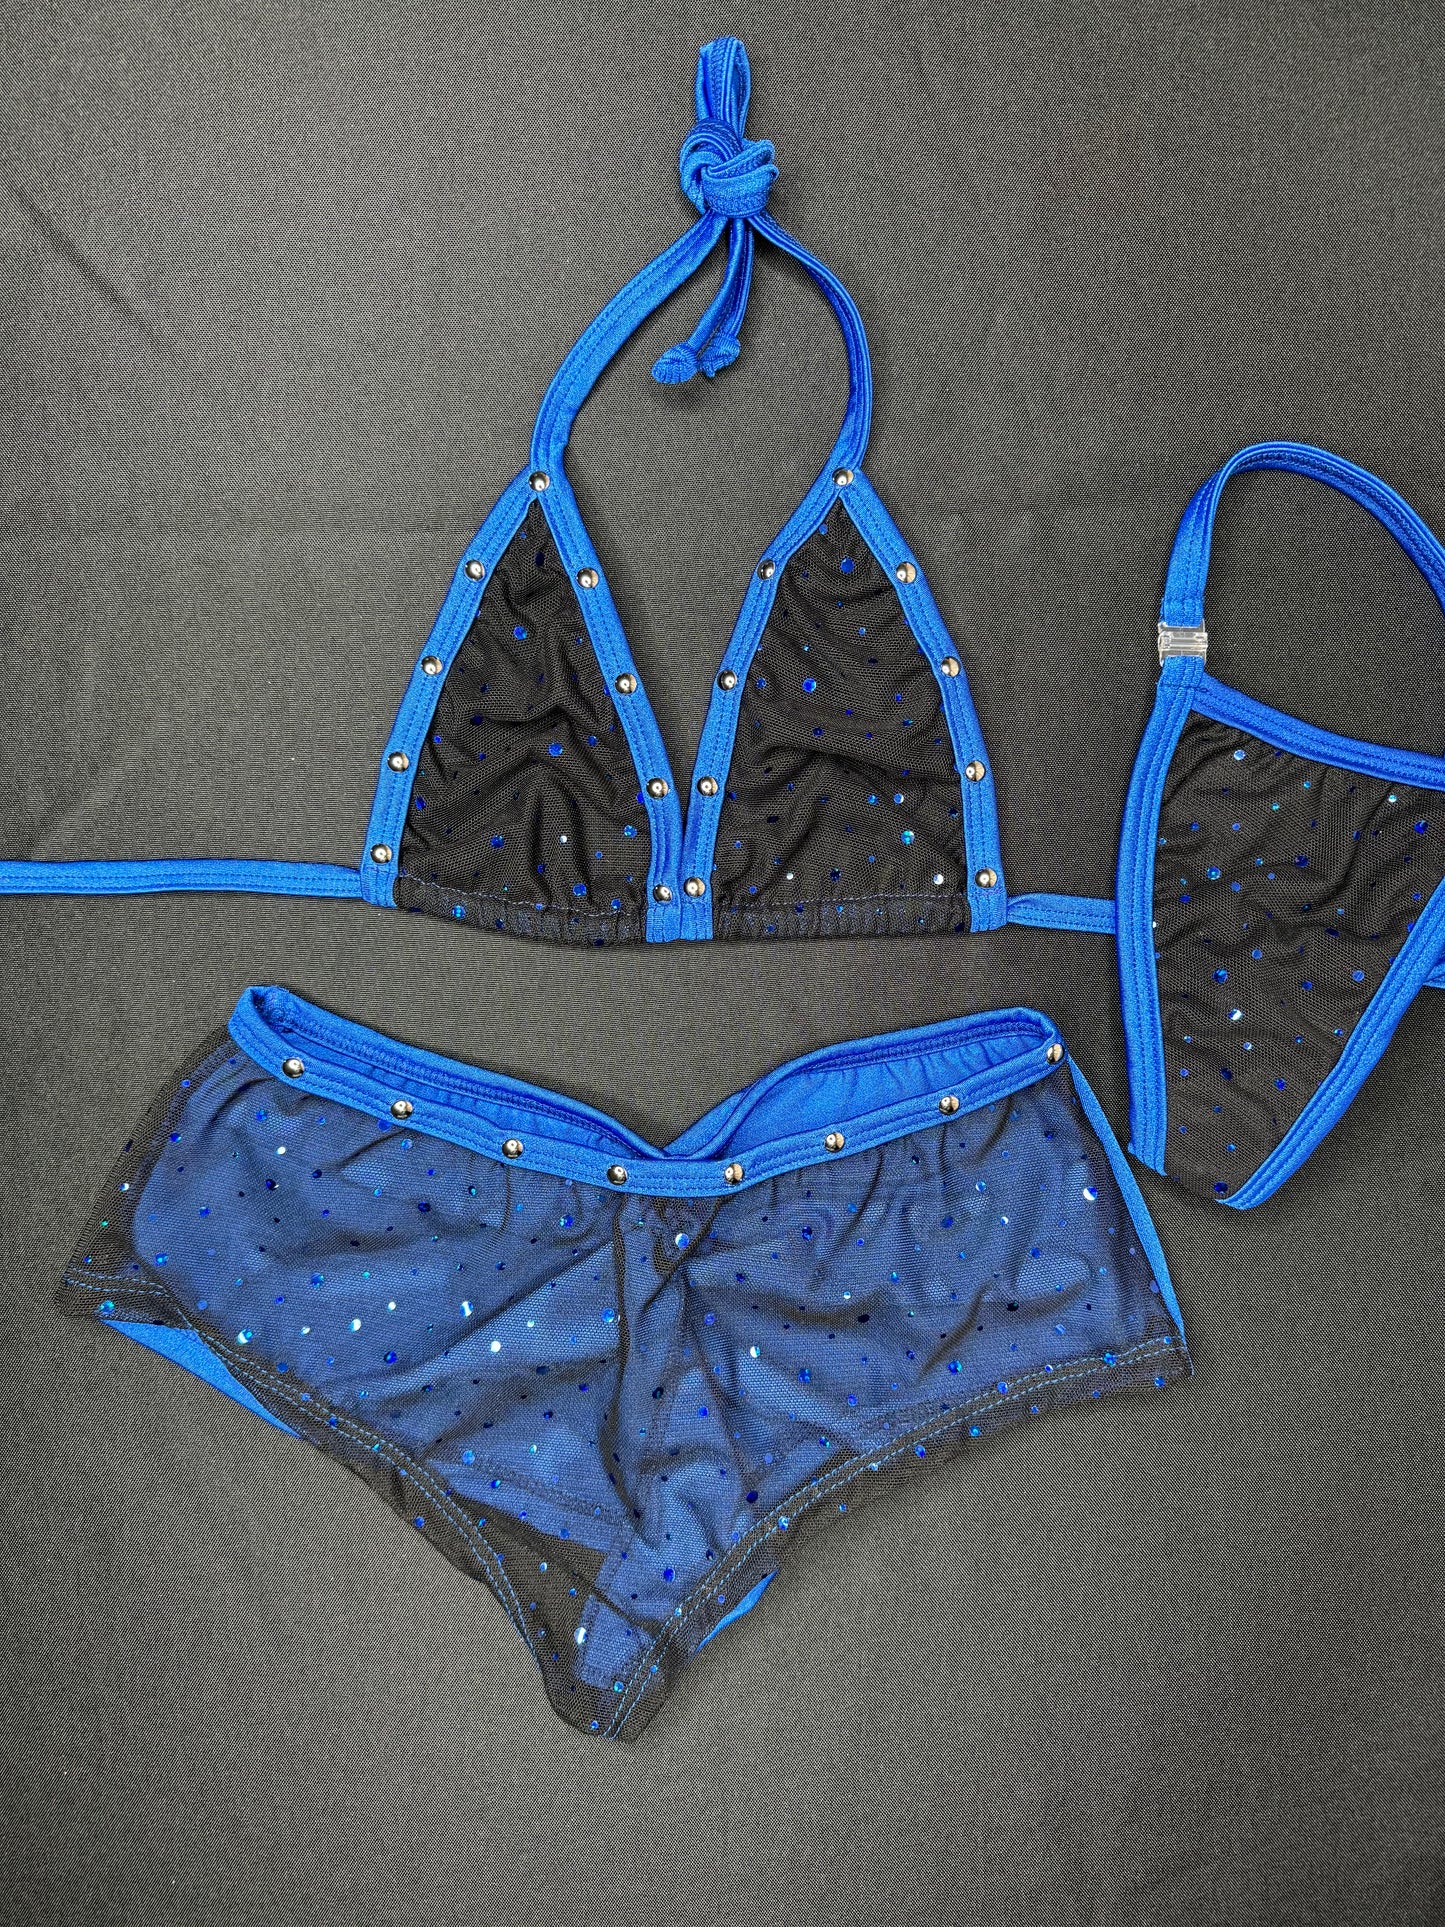 Black Mesh/Royal Blue Two-Piece Cheeky Shorts Lingerie Outfit